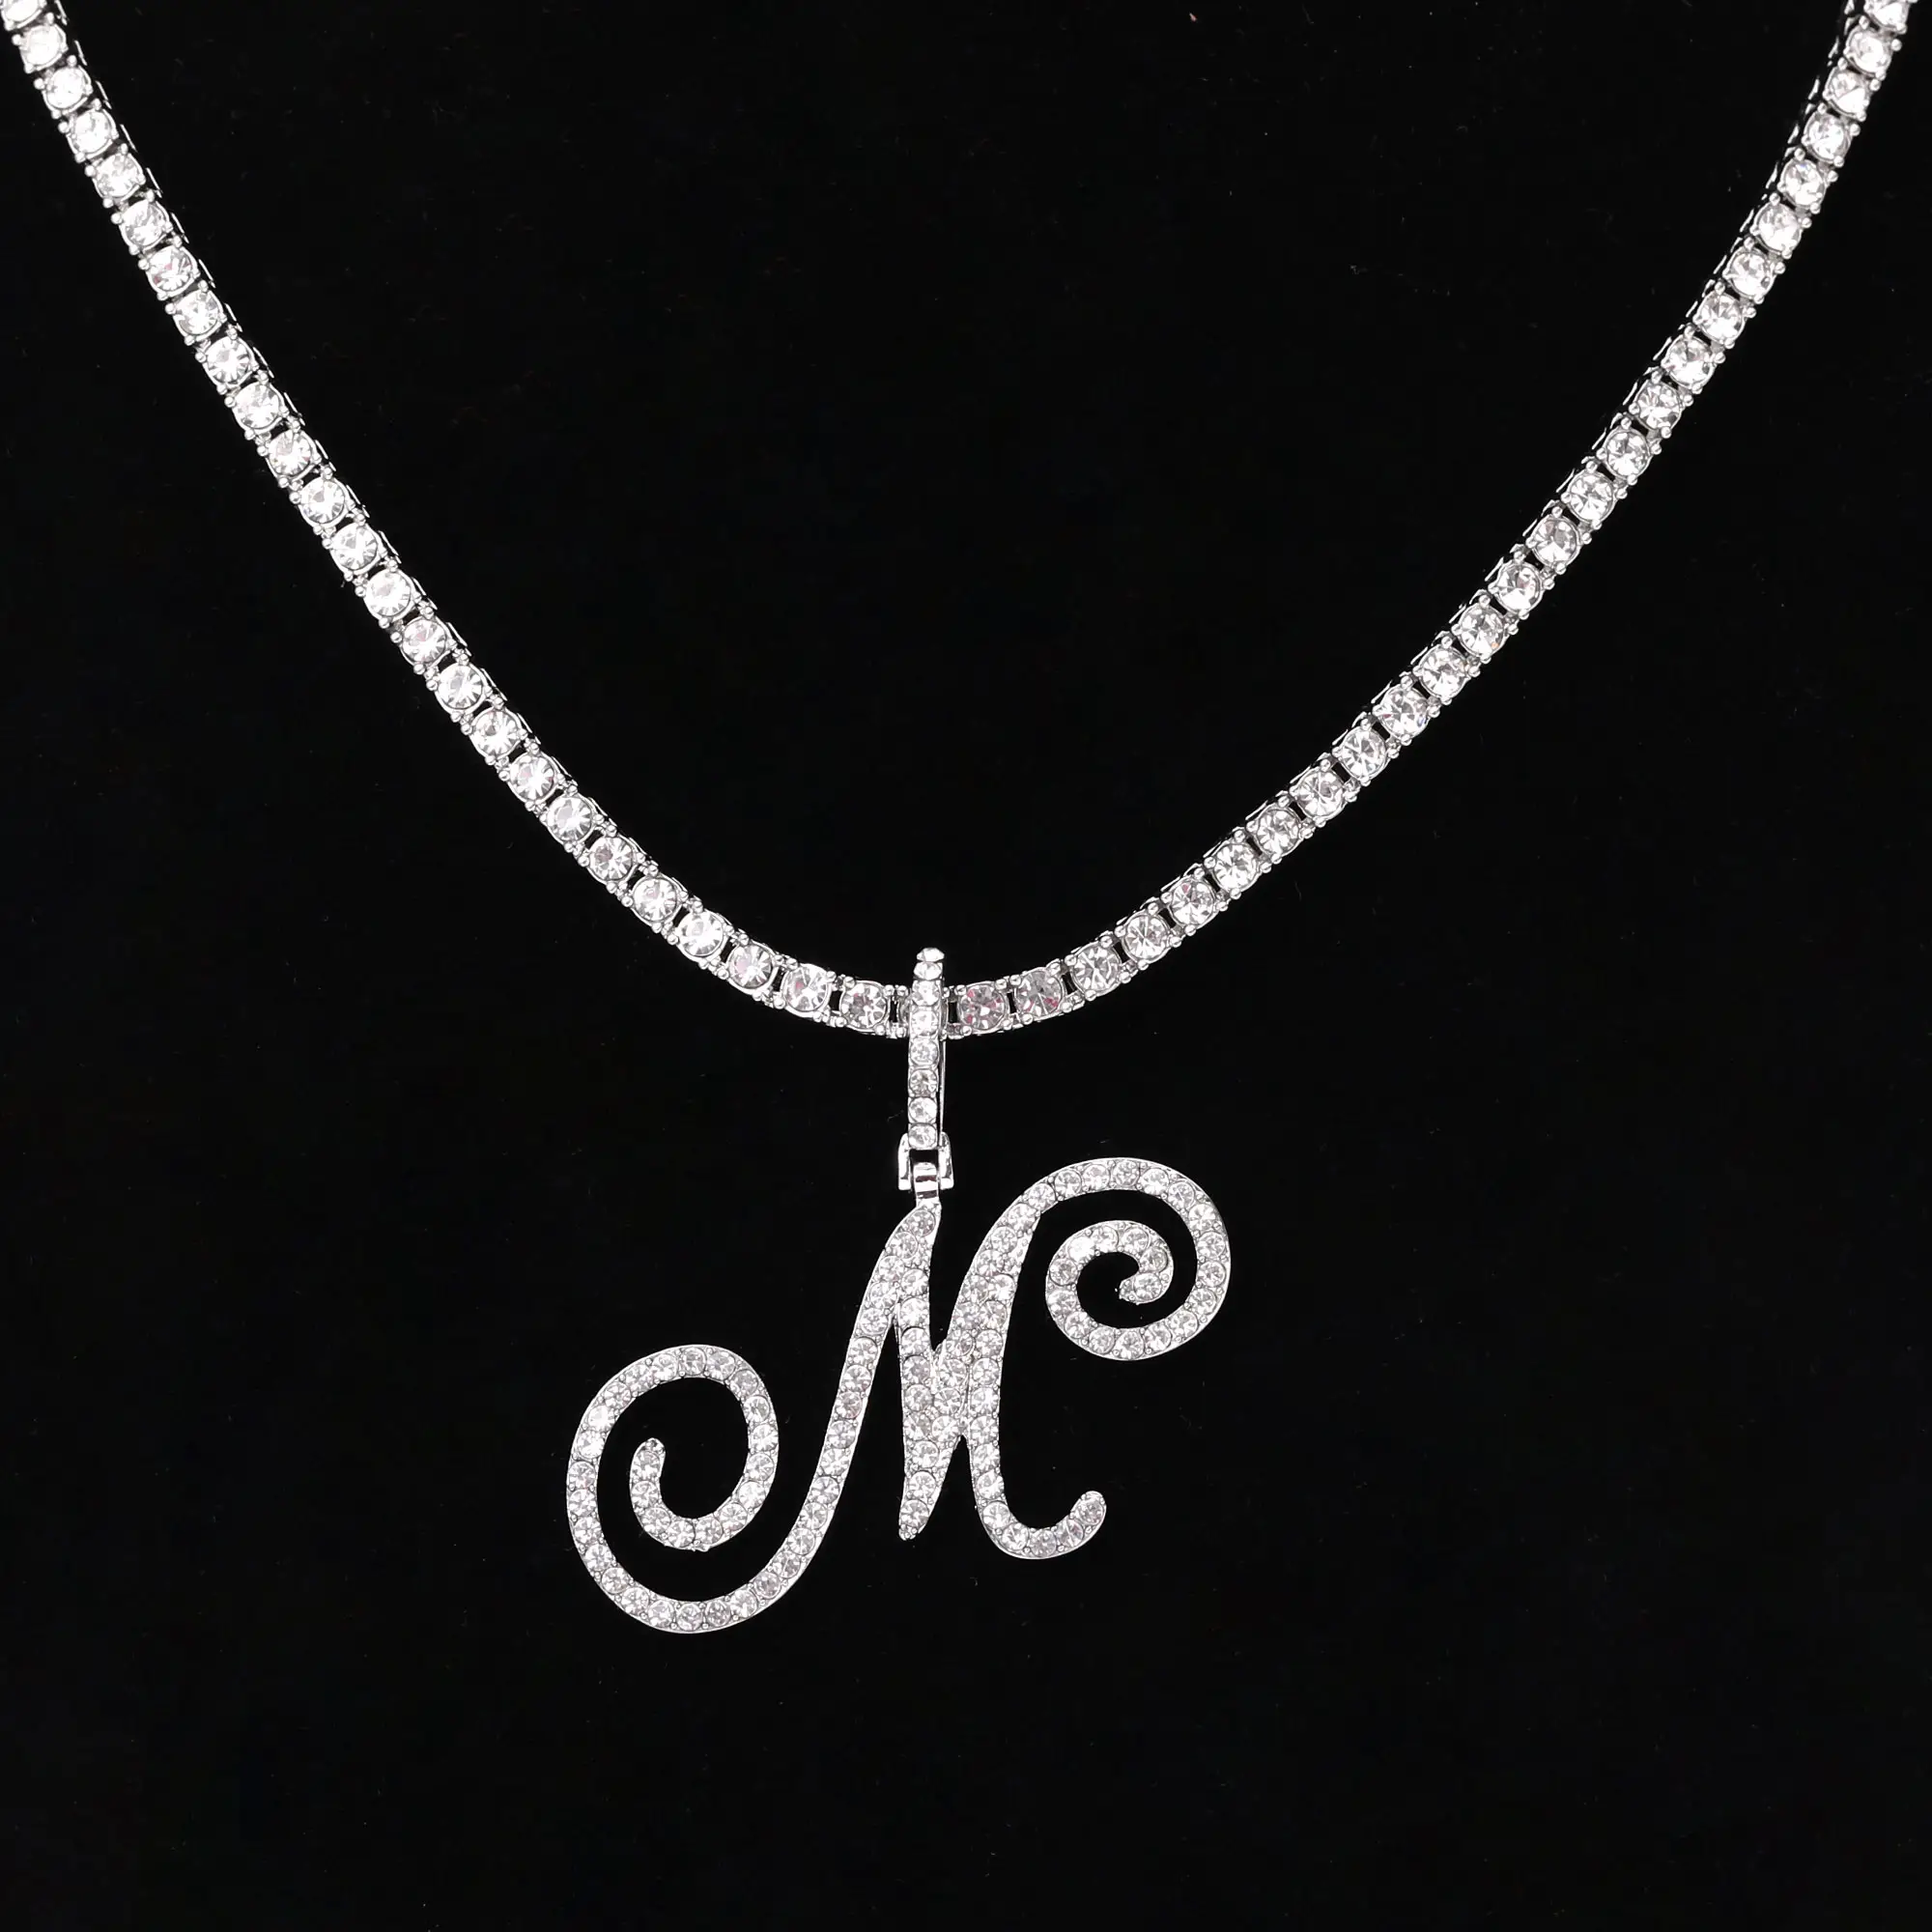 TongLing necklace 14k gold plated iced out zircon diamond custom name initial letter necklace for women